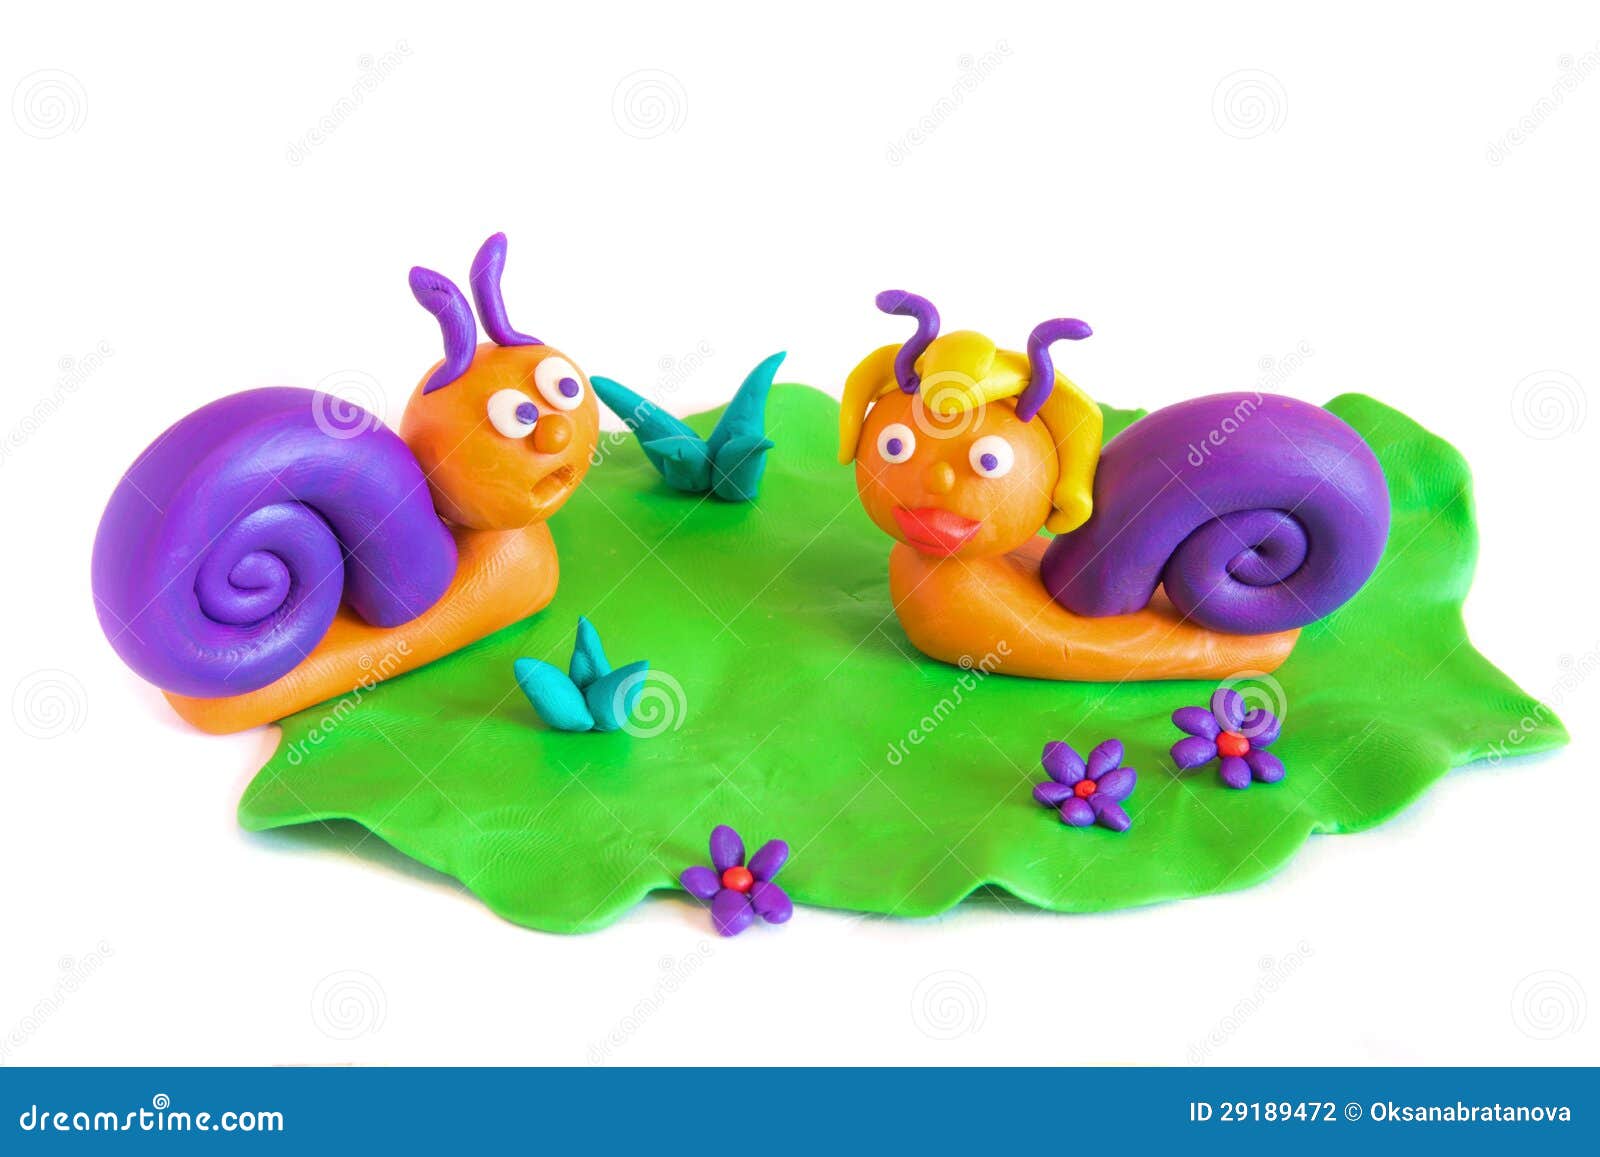 962 Modeling Clay Animal Stock Photos - Free & Royalty-Free Stock Photos  from Dreamstime